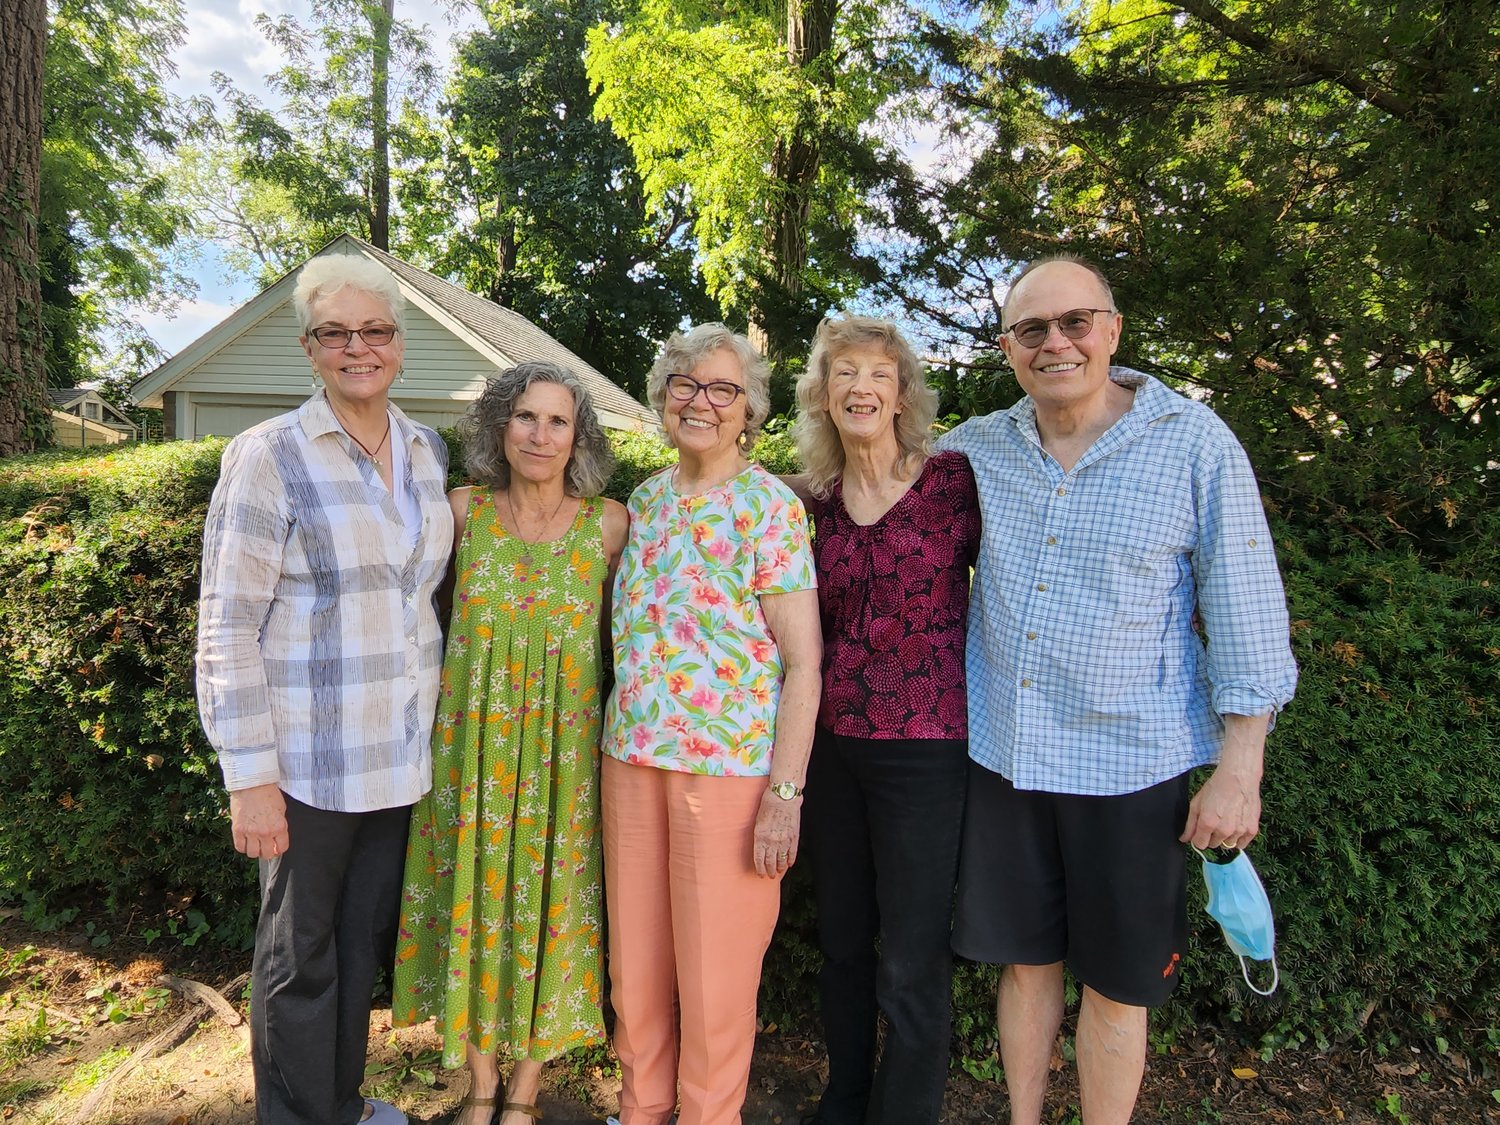 Victoria Bjorklund, far left, Barbara Segal, Evelyn Kandel, Janice Kuhl and Hank Bjorklund came to the home of Evelyn Kandel to discuss her past.